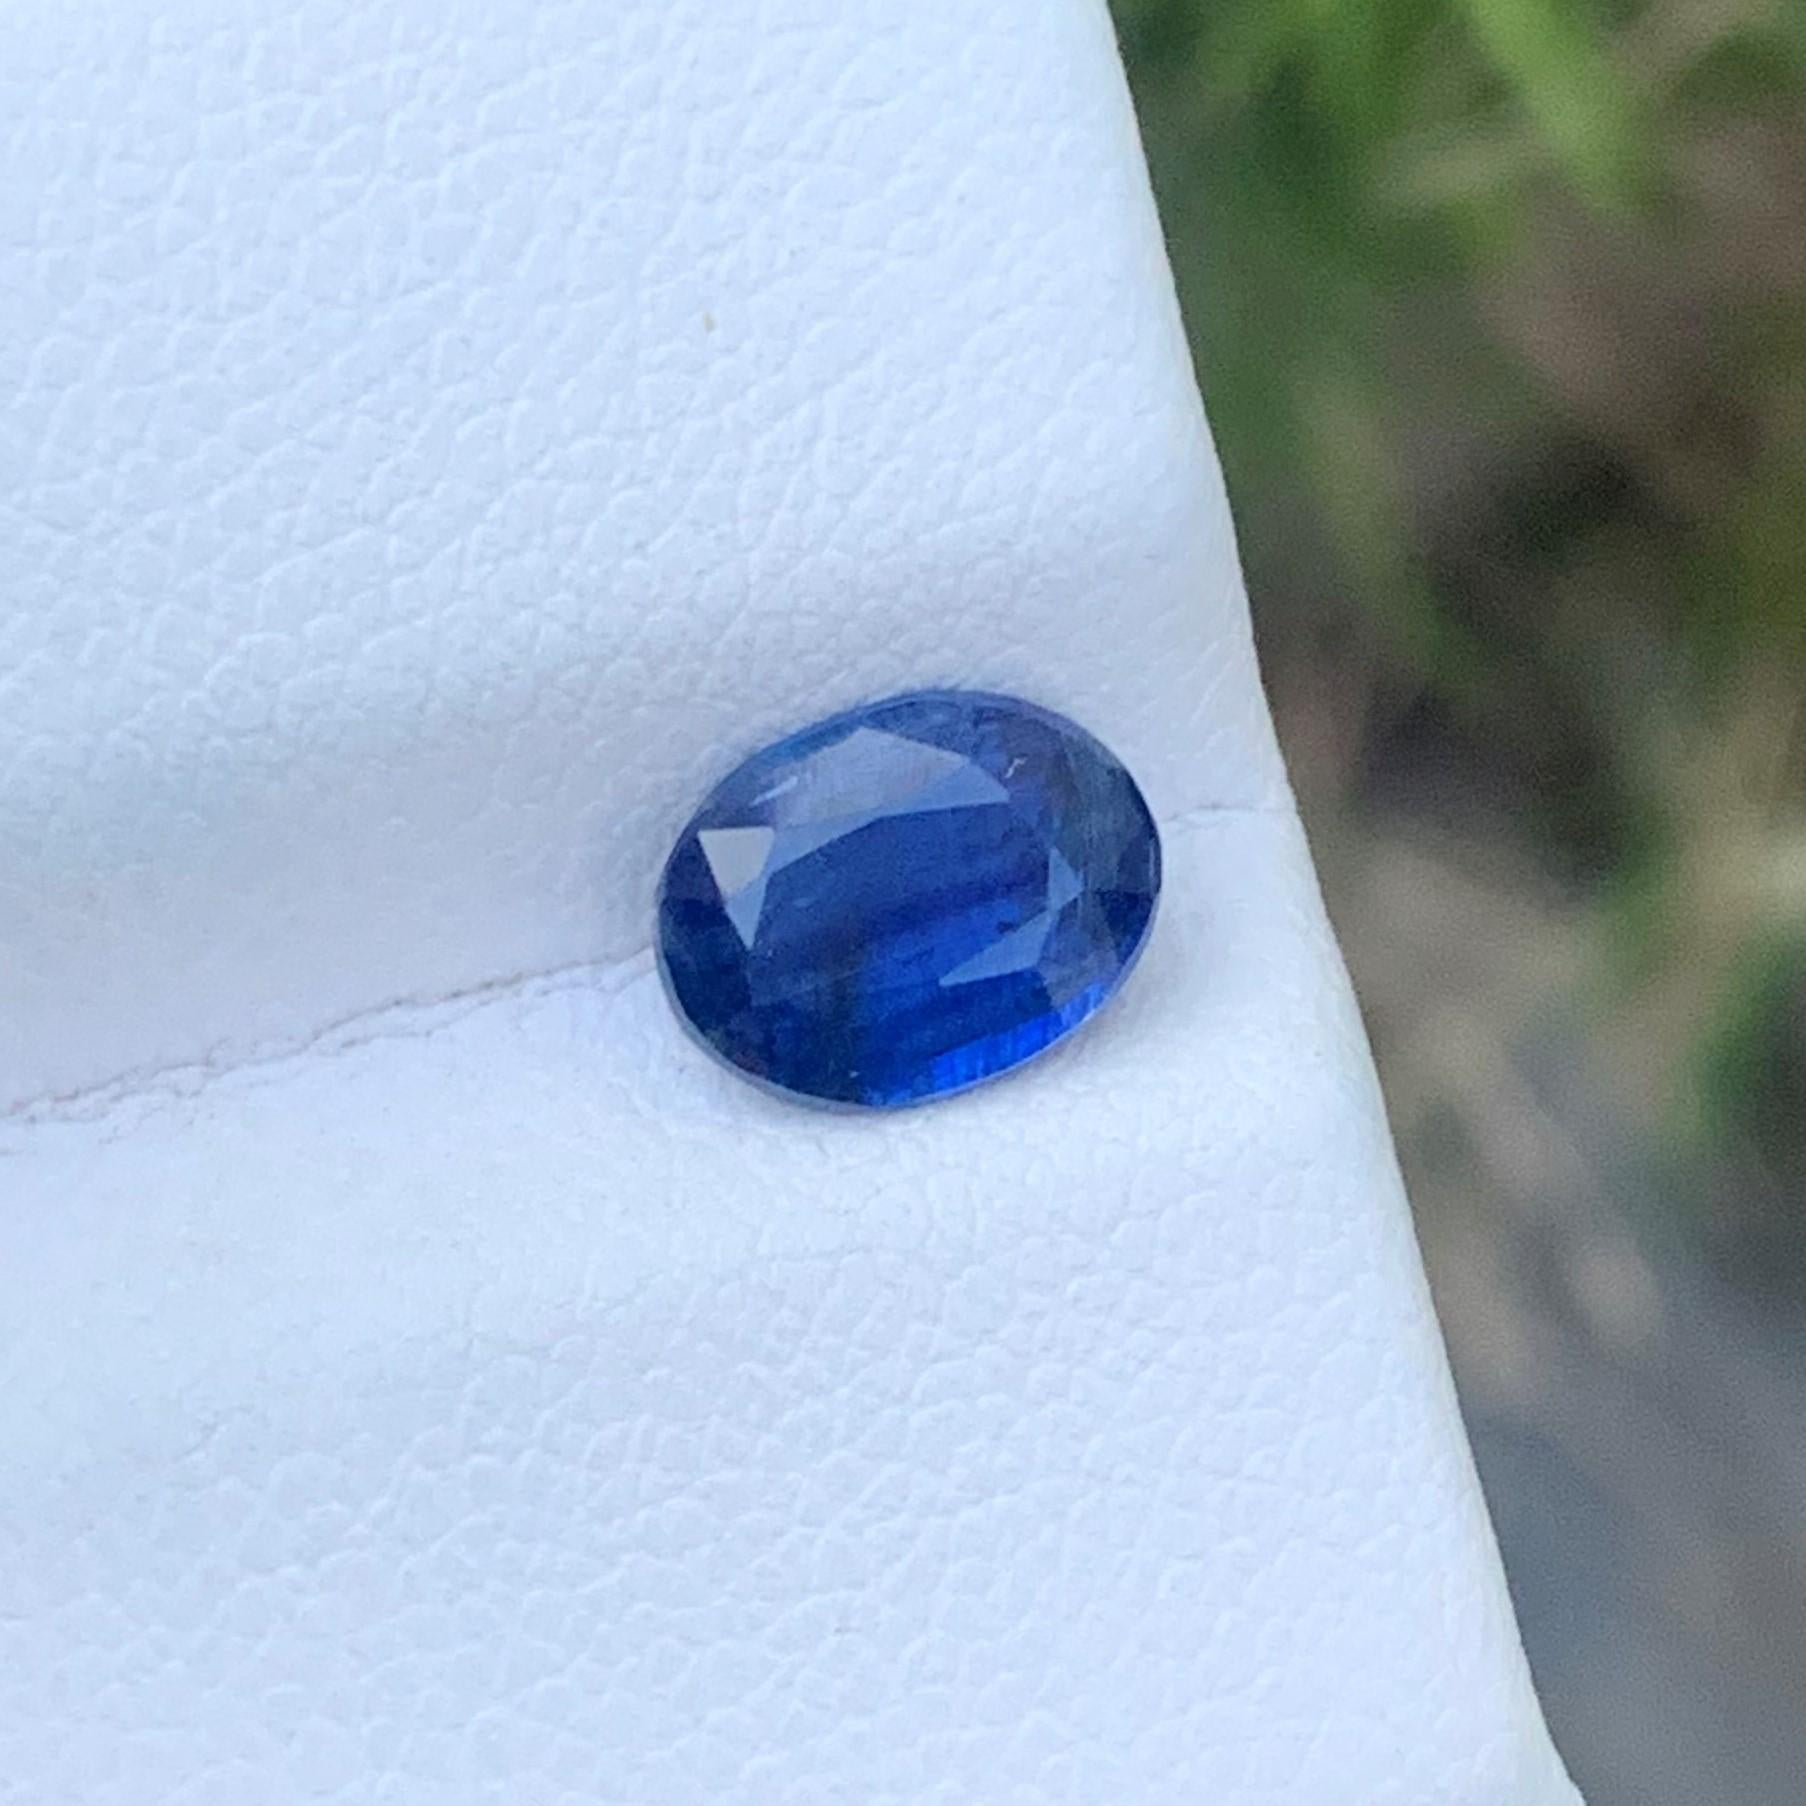 Gemstone Type : Kyanite
Weight : 1.40 Carats
Dimensions : 8x6x3.4 Mm
Origin : Kunar Afghanistan
Clarity : Eye Clean
Shape: Heart
Color: Mint Green
Certificate: On Demand
Kyanite gemstones typically come from places like Myanmar, Cambodia, Kenya,